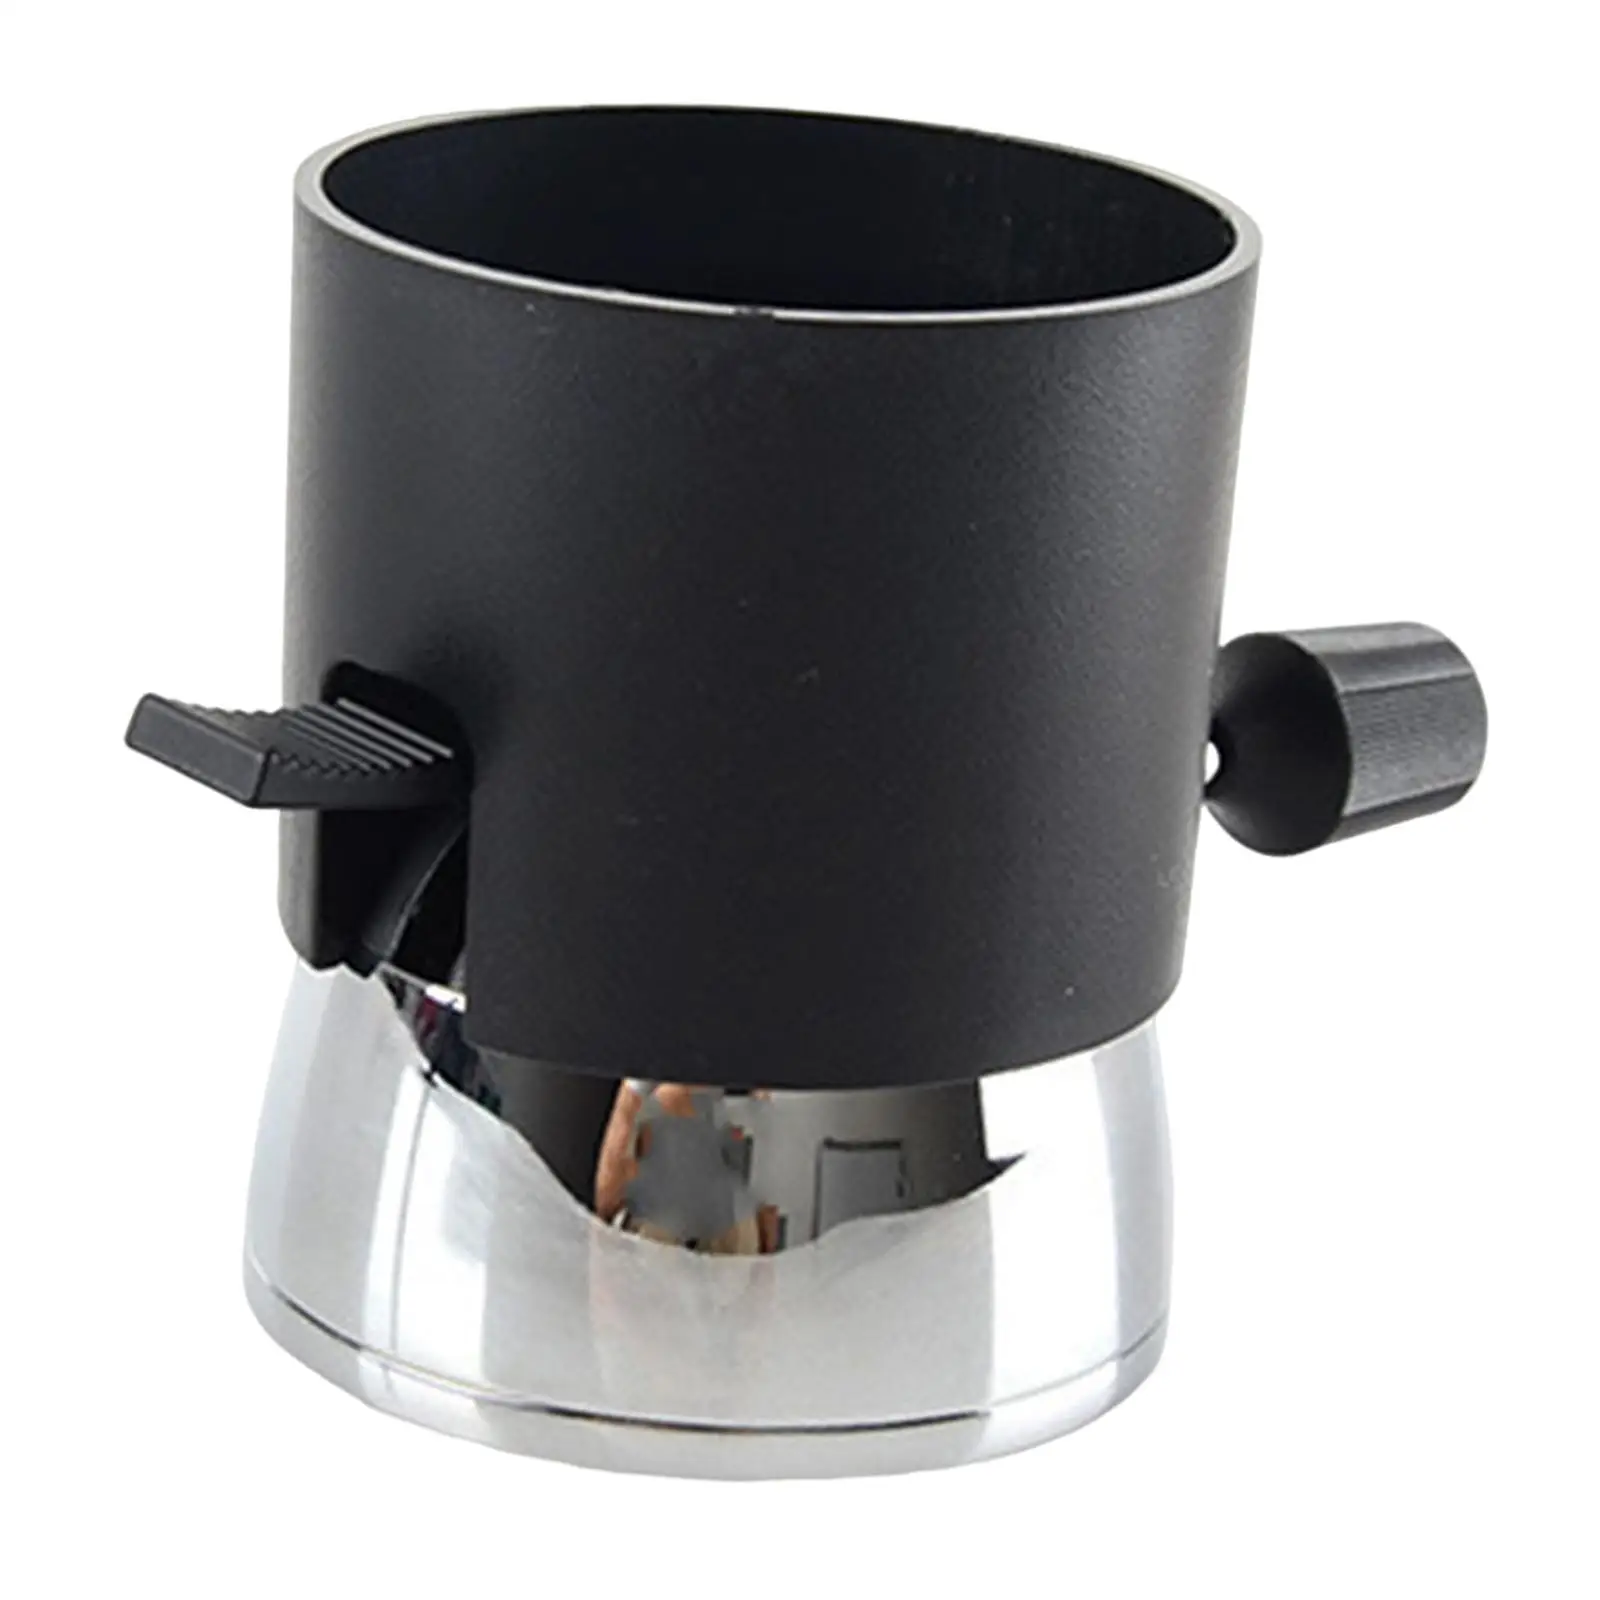 Mini Burner Siphon Coffee Maker Cooking Portable Camping Gas